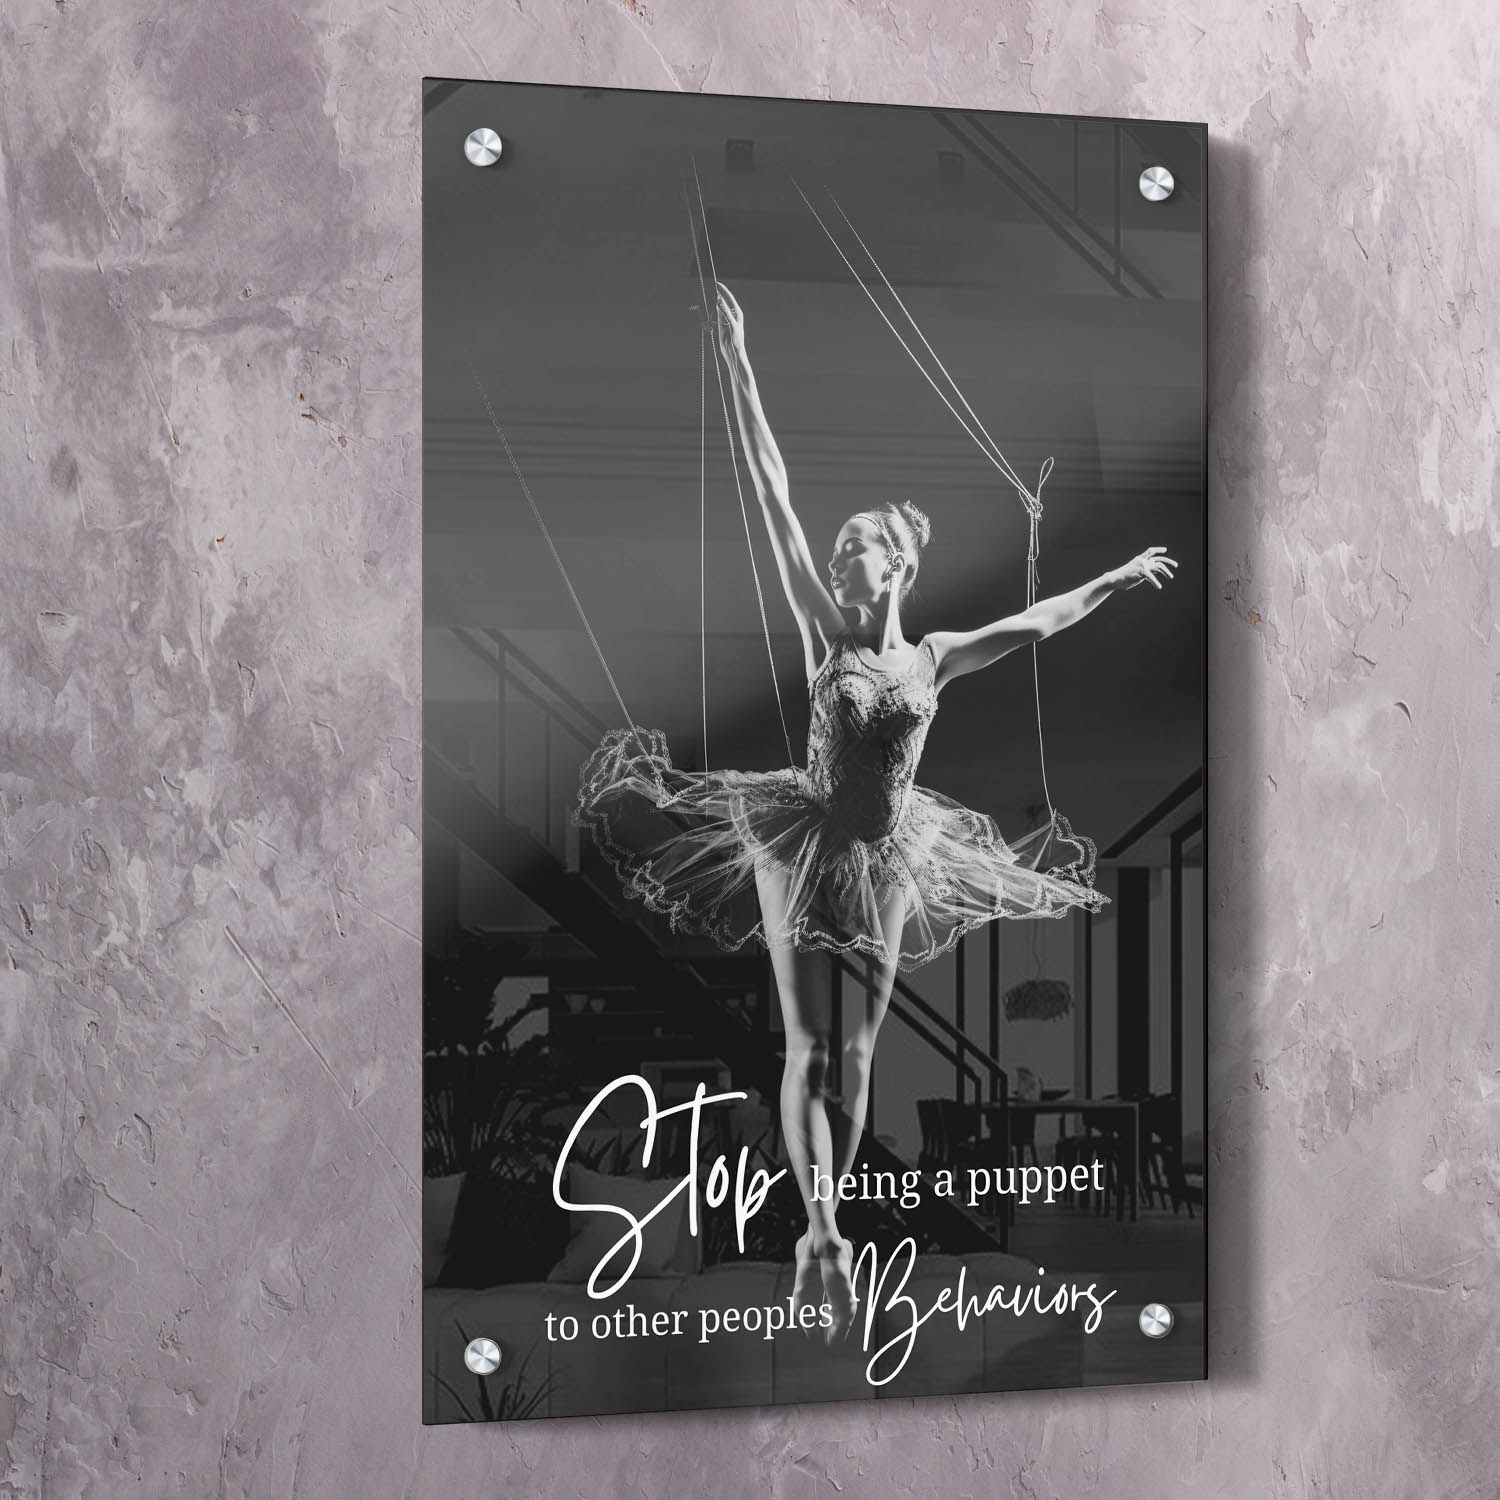 Ballet Puppet - Stop being a puppet to other Wall Art | Inspirational Wall Art Motivational Wall Art Quotes Office Art | ImpaktMaker Exclusive Canvas Art Portrait